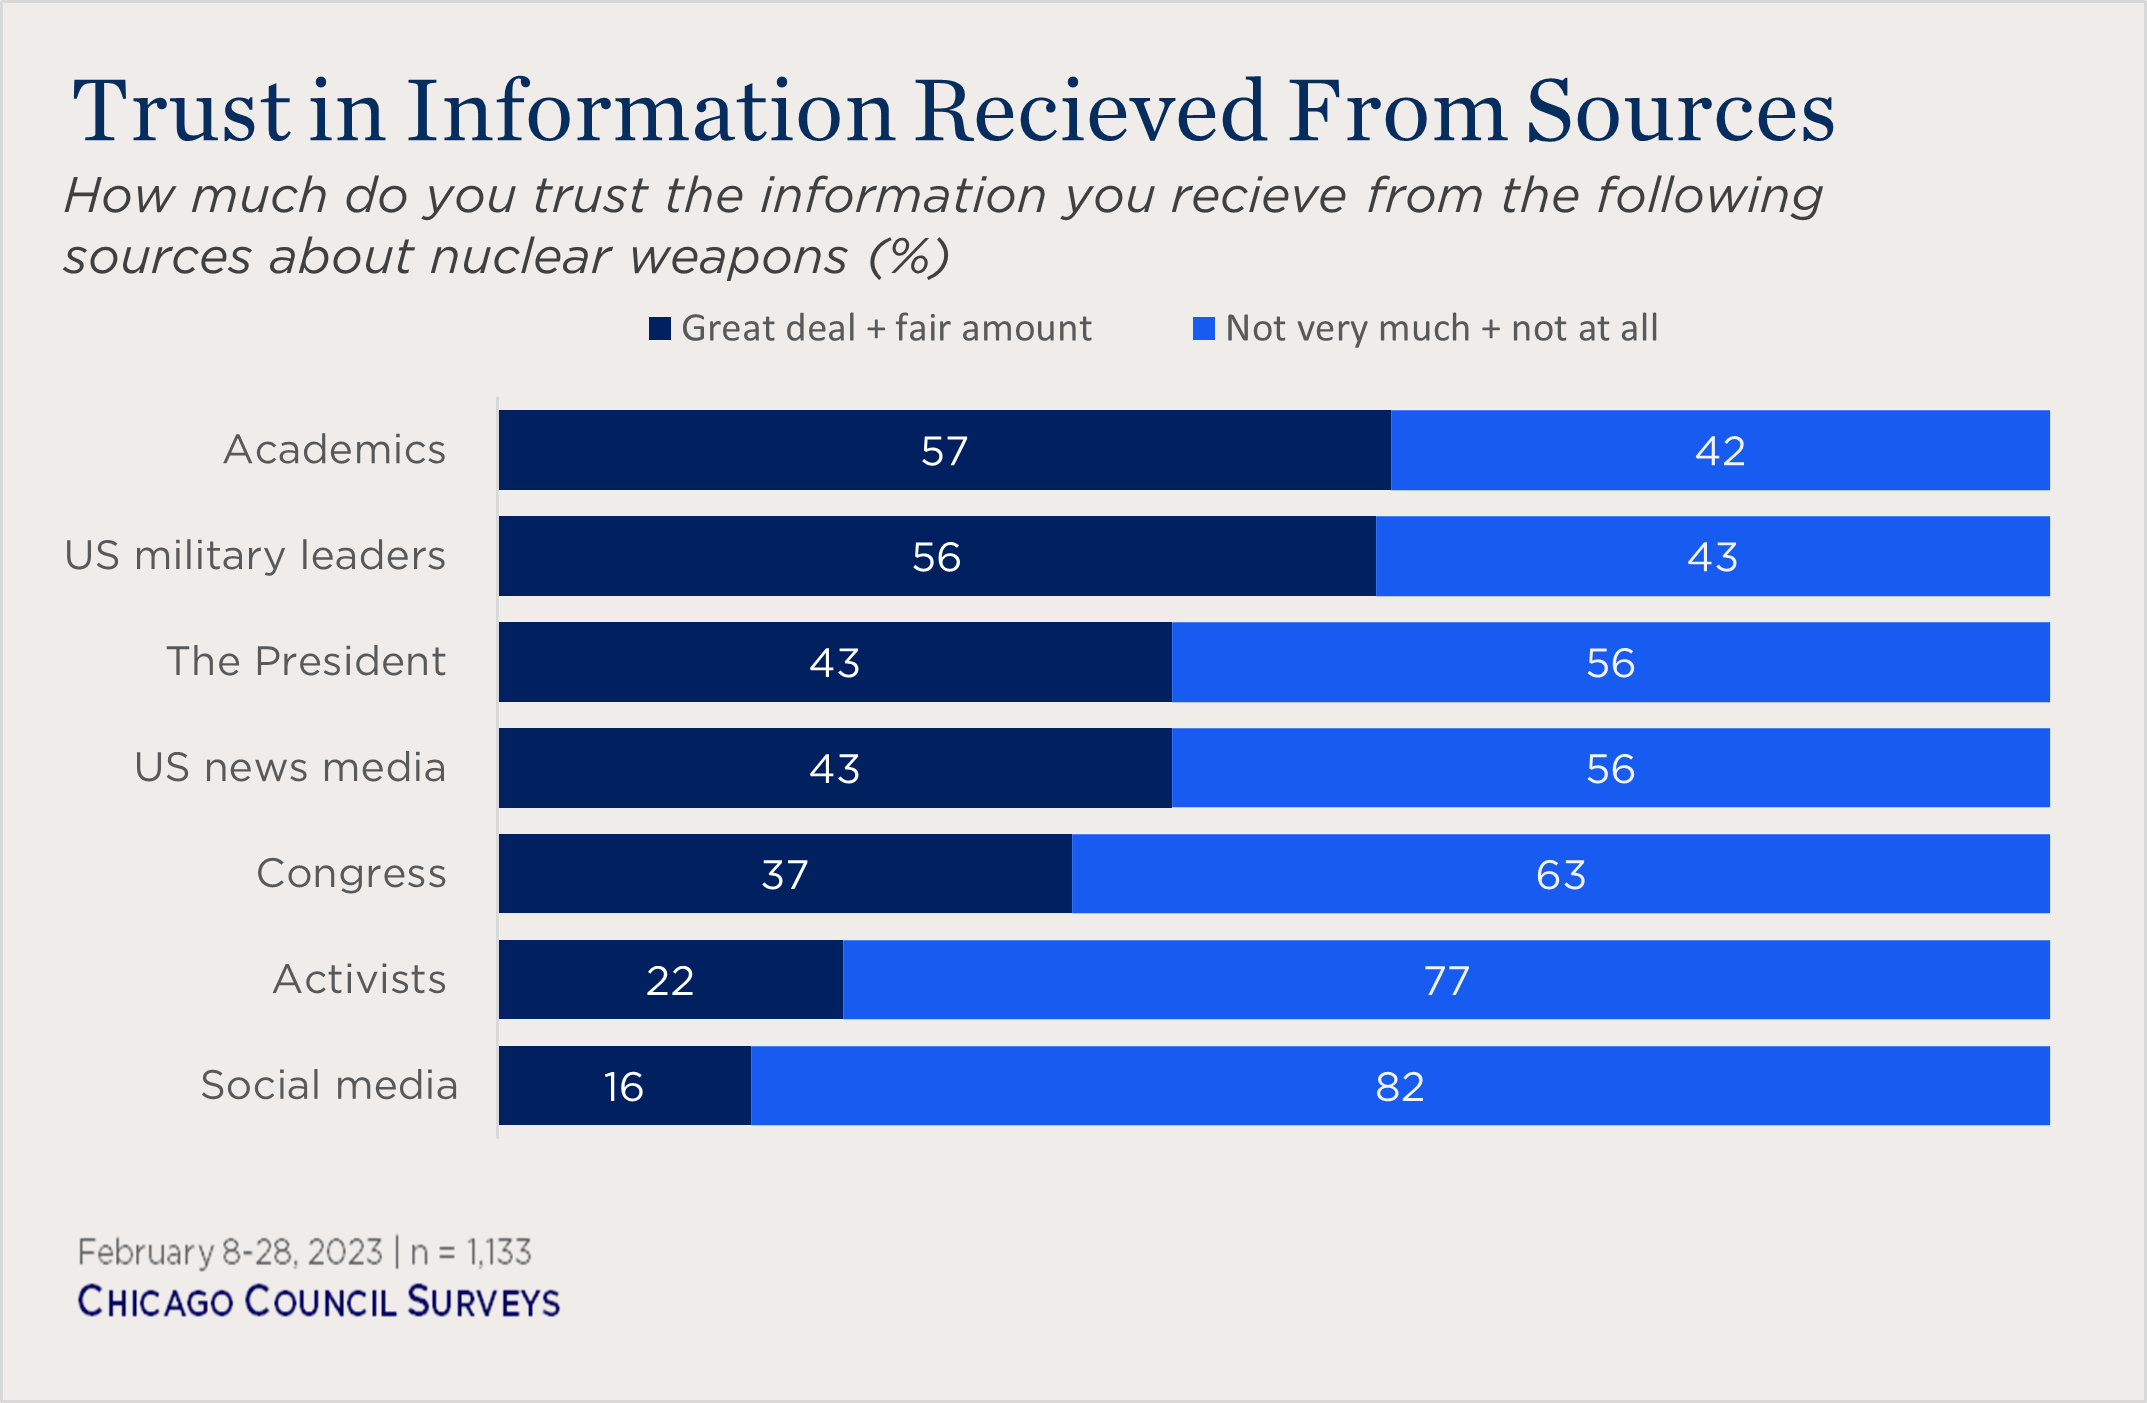 "bar chart showing trust in sources of nuclear information"